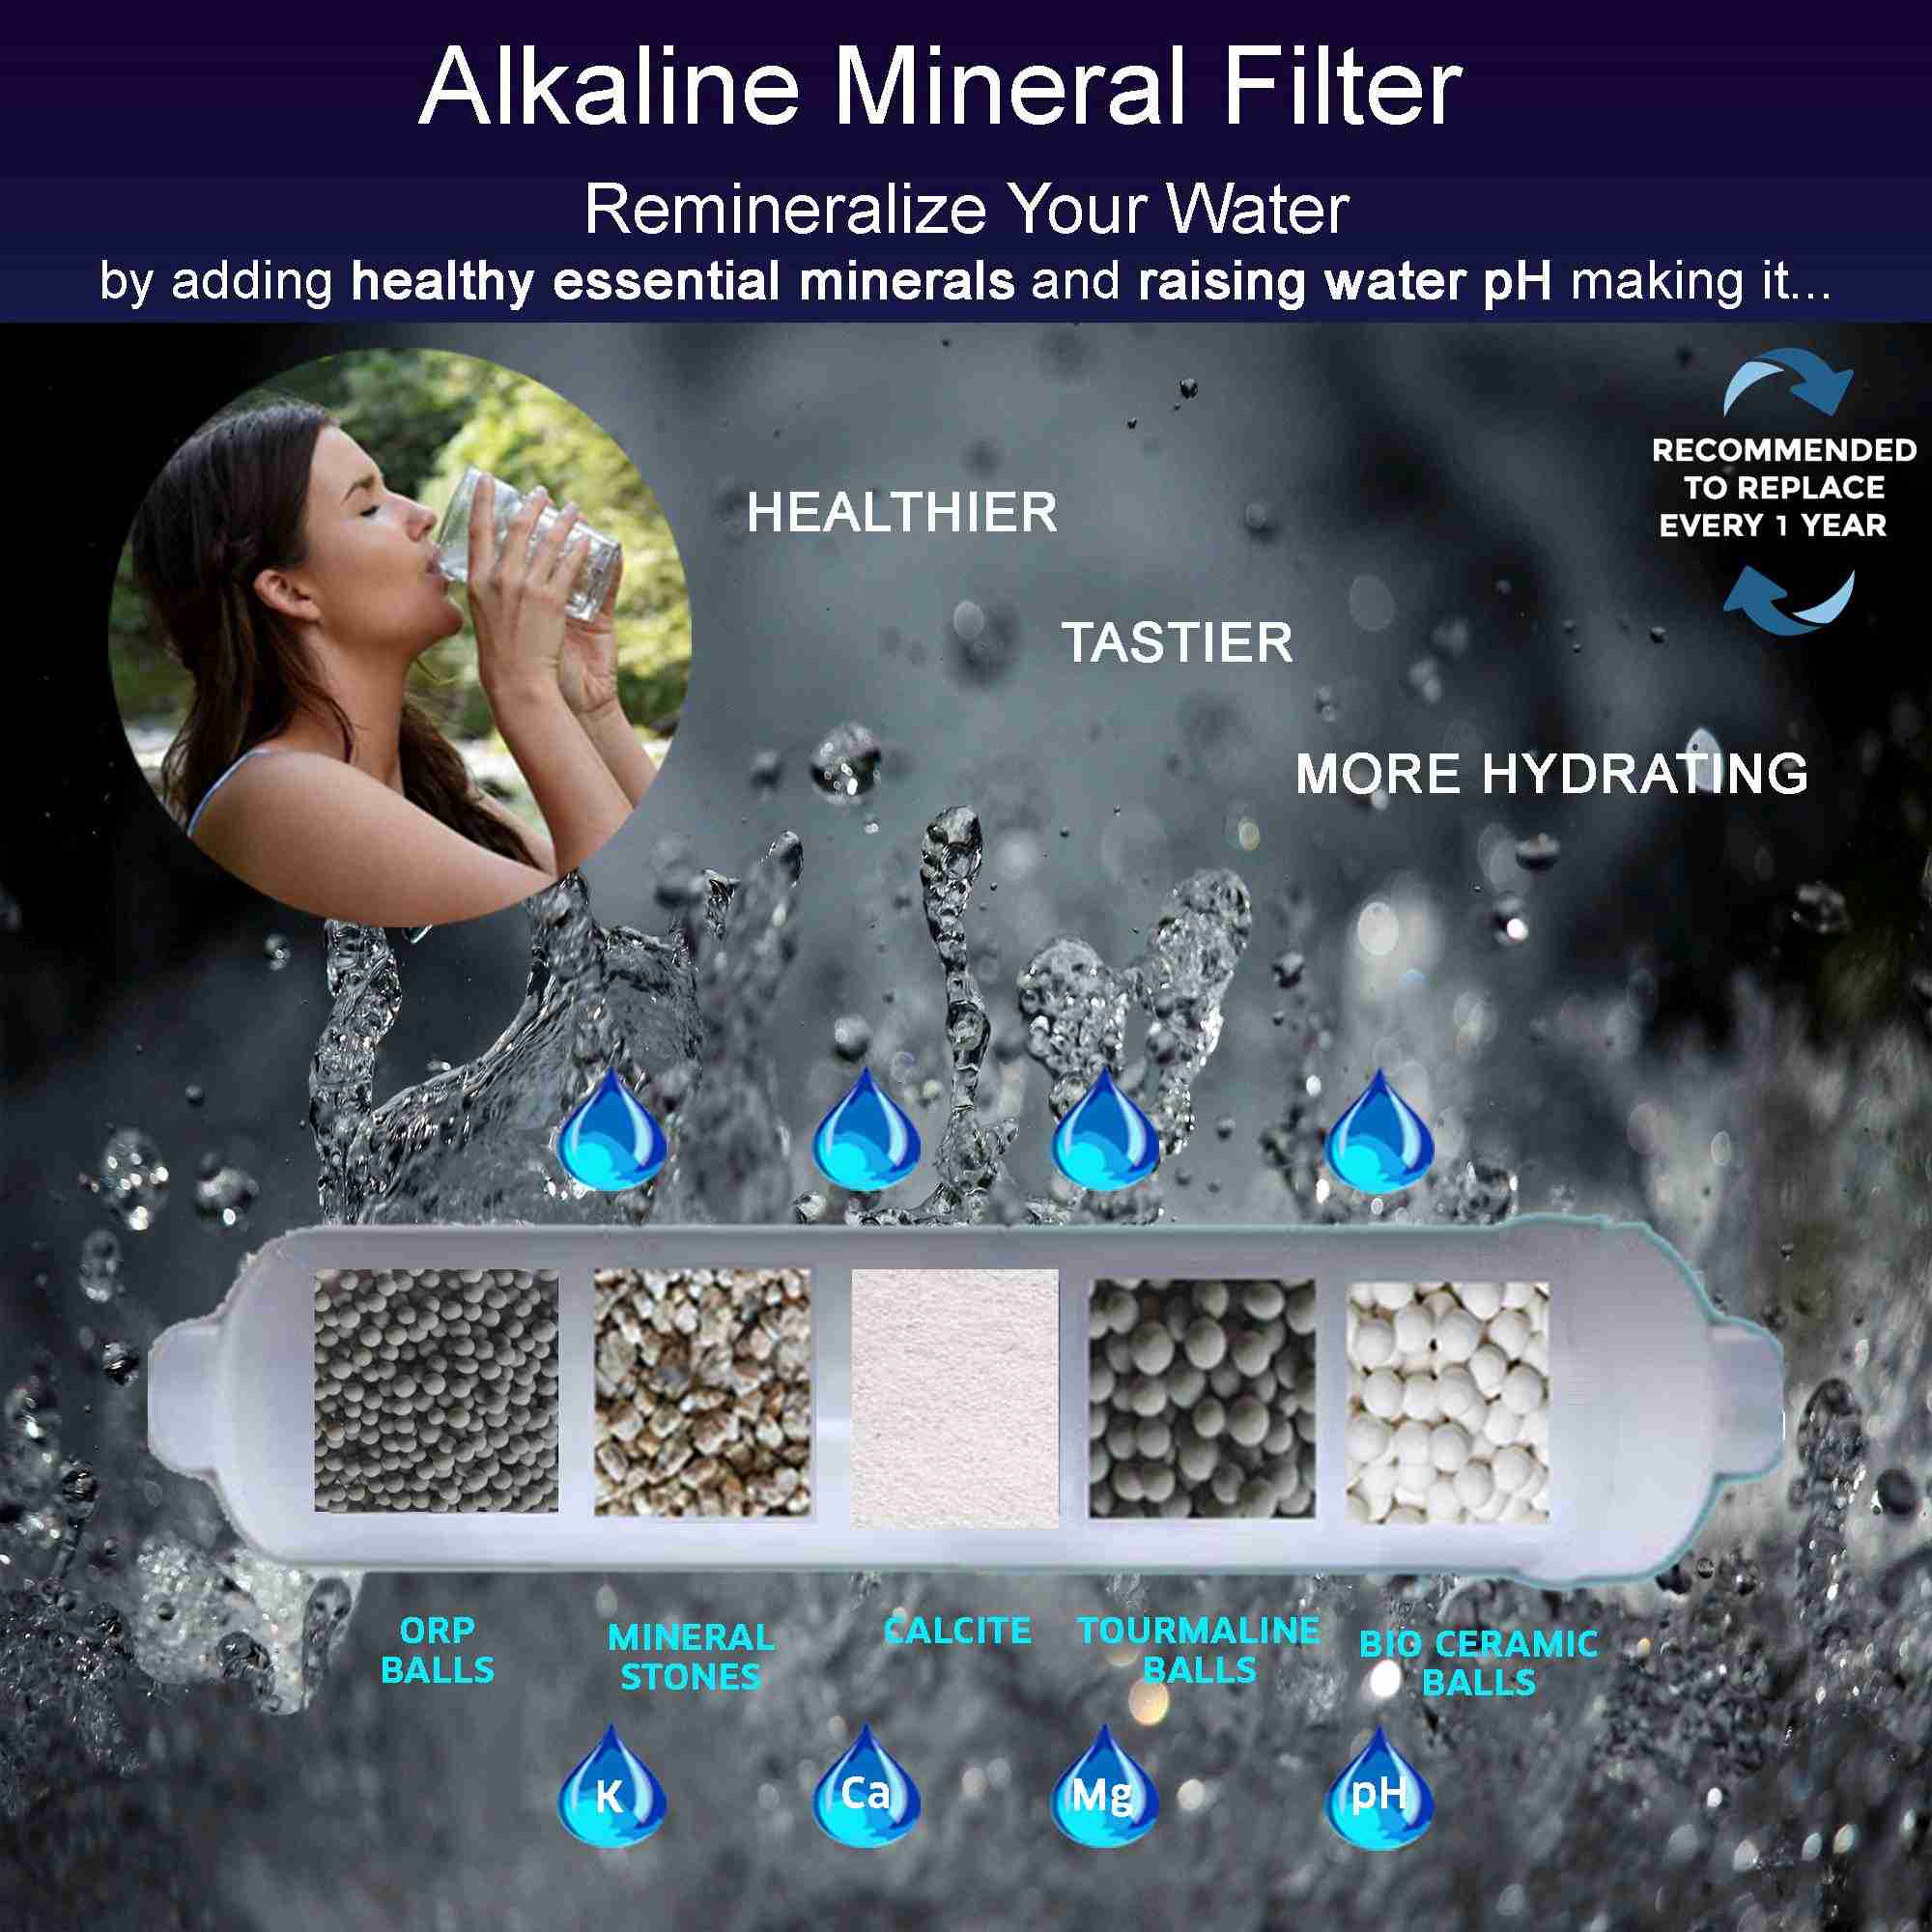 AF-5005 - Ultra 6-Stage Alkaline Mineral pH+ Reverse Osmosis Water Purification Filter - 100 GPD - NSF Filters